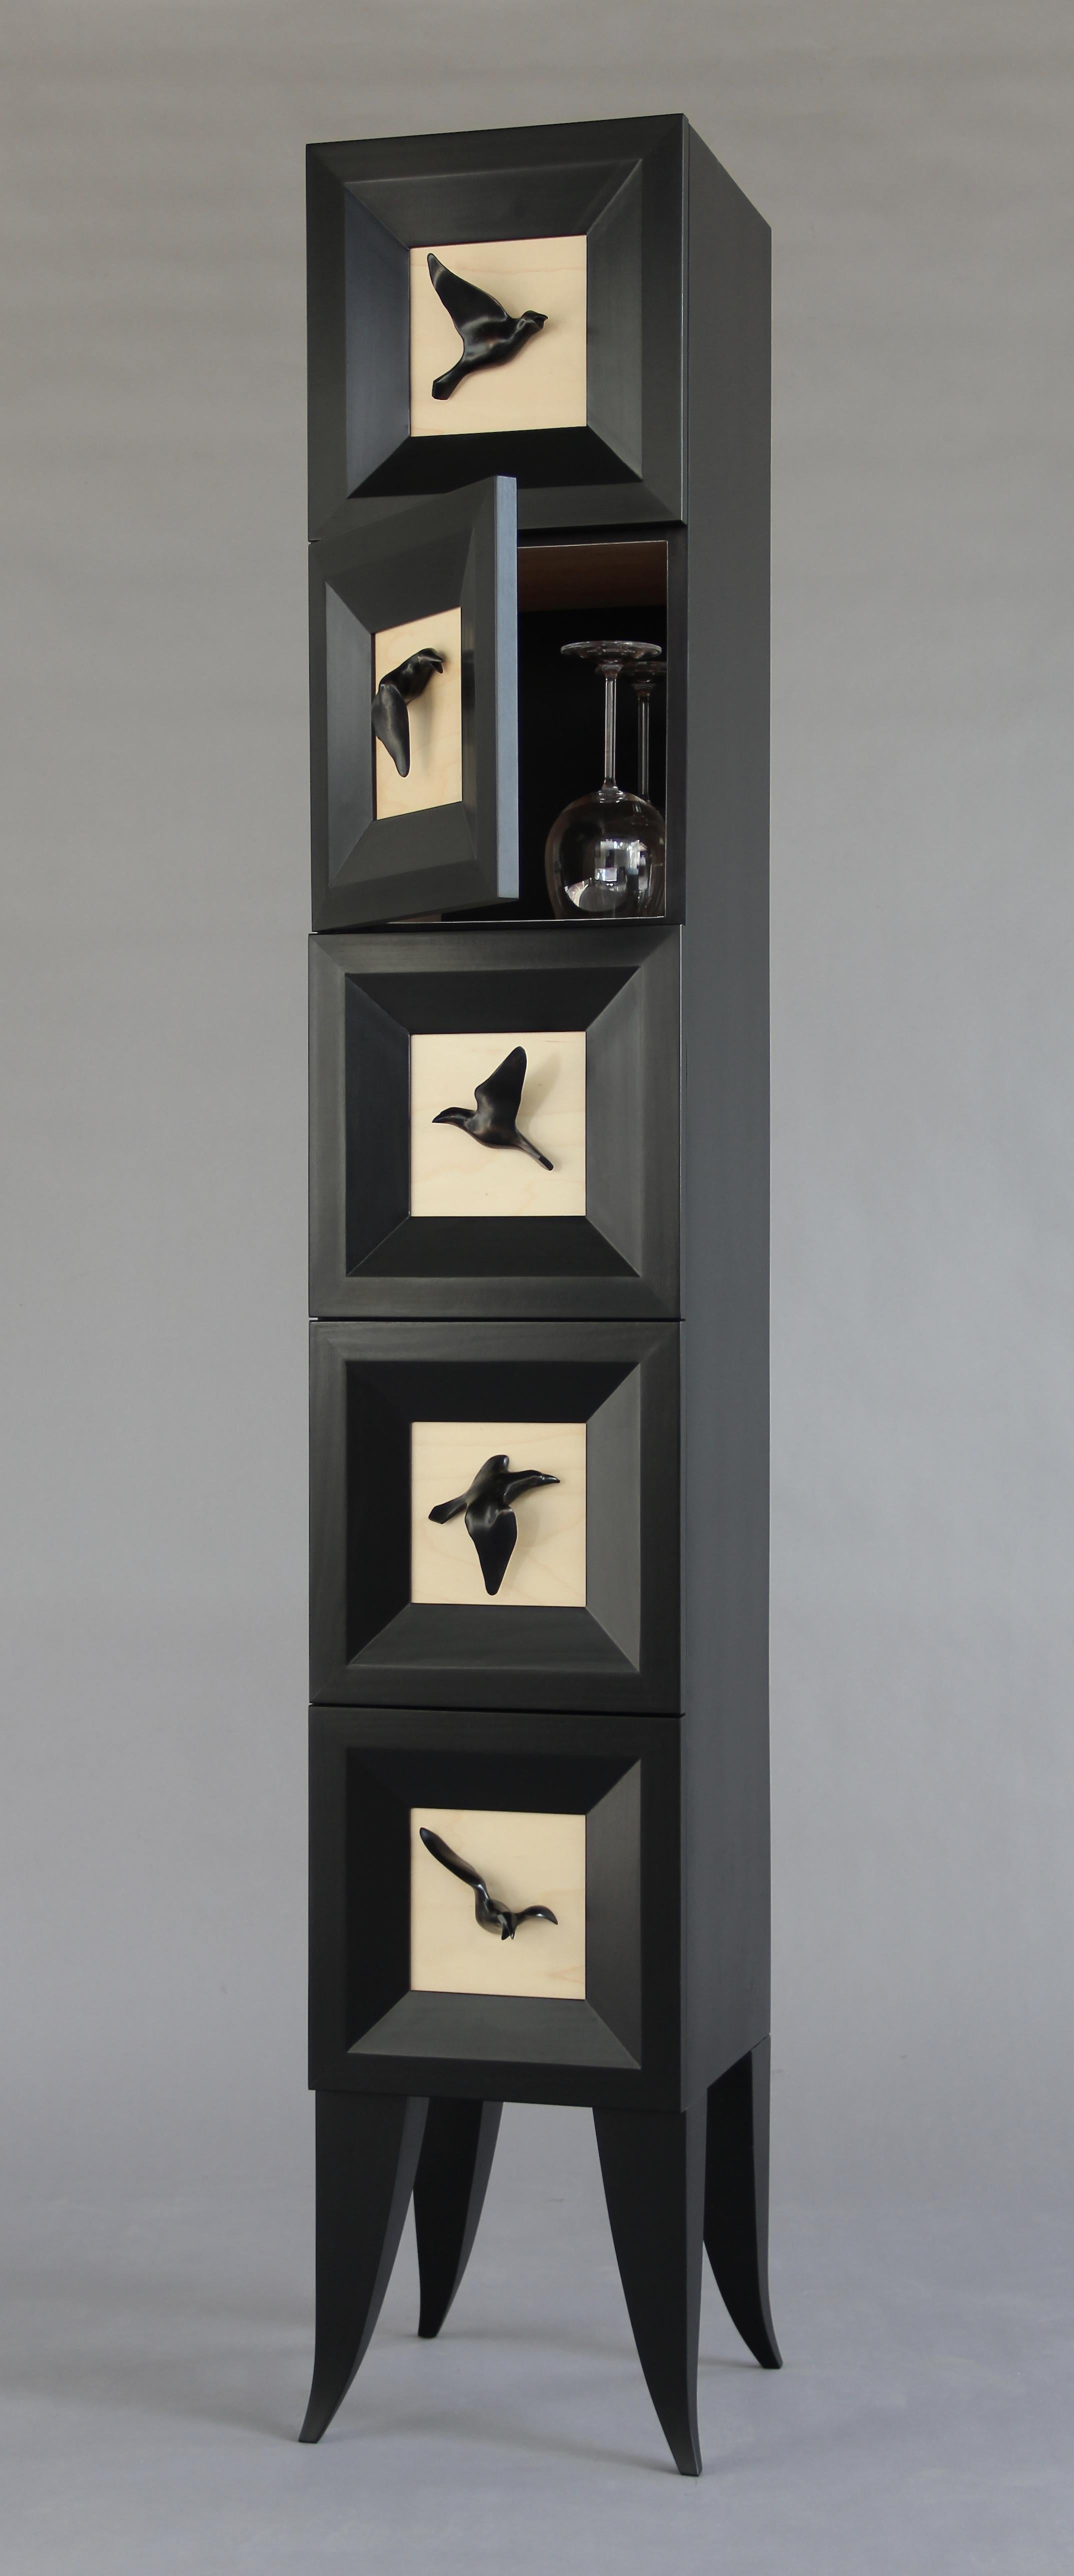 The Raven Tower is a five-door vertical cabinet that is a perfect signature piece for almost any room. It takes up just one square foot of floor space. The door fronts feature cold-cast bronze ravens that are individually carved and cast by the